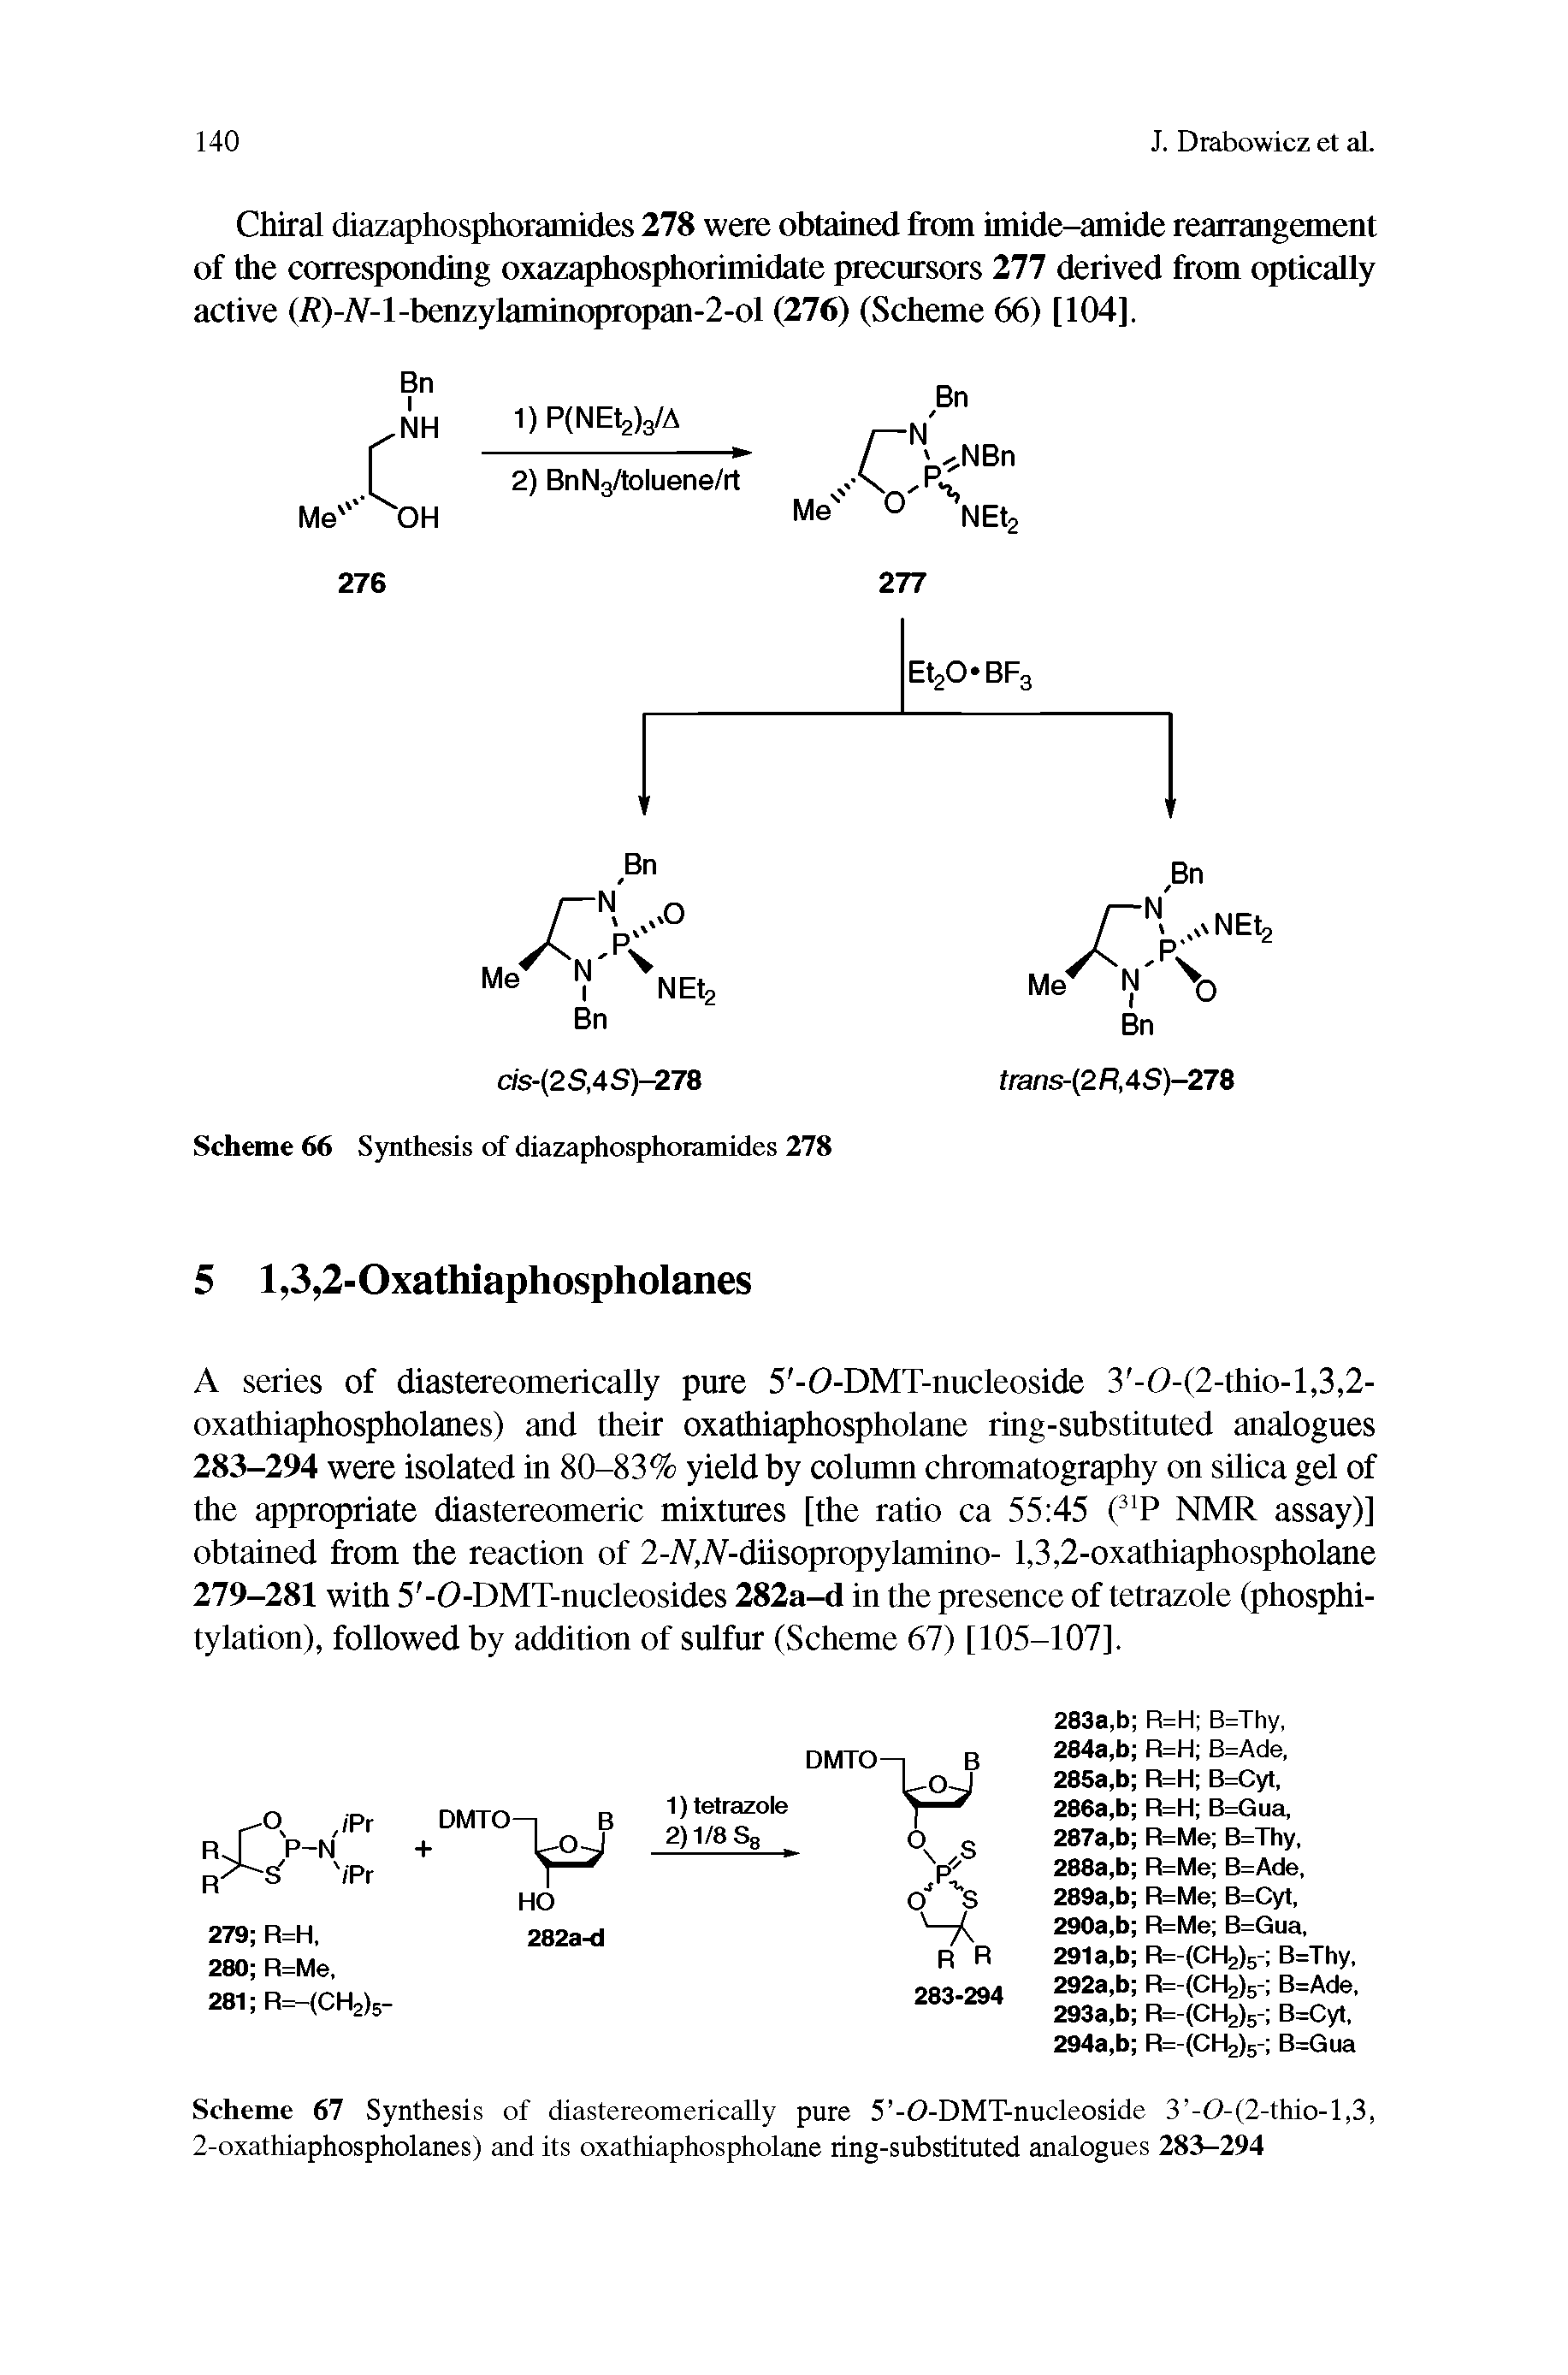 Scheme 67 Synthesis of diastereomerically pure 5 -0-DMT-nucleoside 3 -0-(2-thio-l,3, 2-oxathiaphospholanes) and its oxathiaphospholane ring-substituted analogues 283-294...